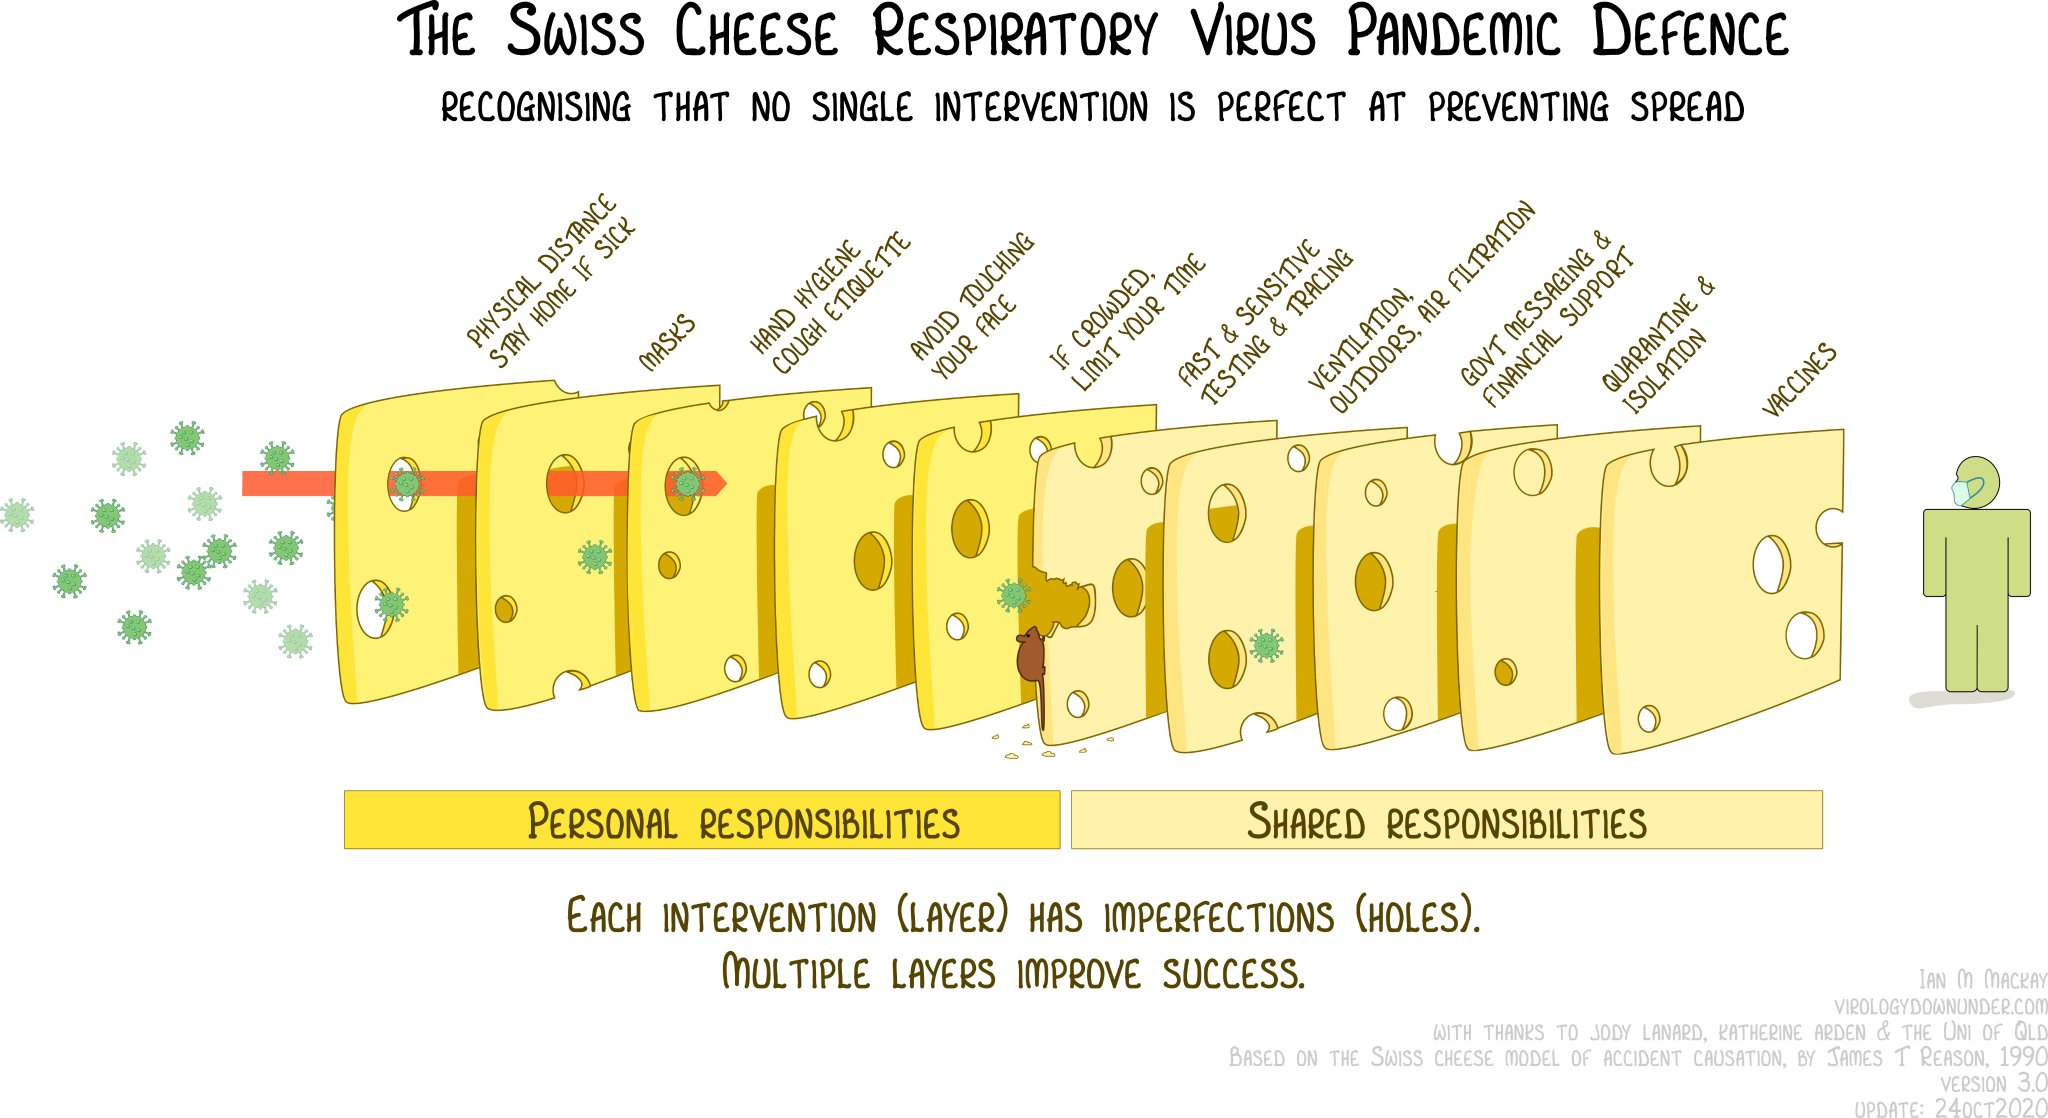 Image shows several layers of swiss cheese between virus particles and a person. Particles that make it through early slices are stopped by later slices, even though all slices have holes in them.